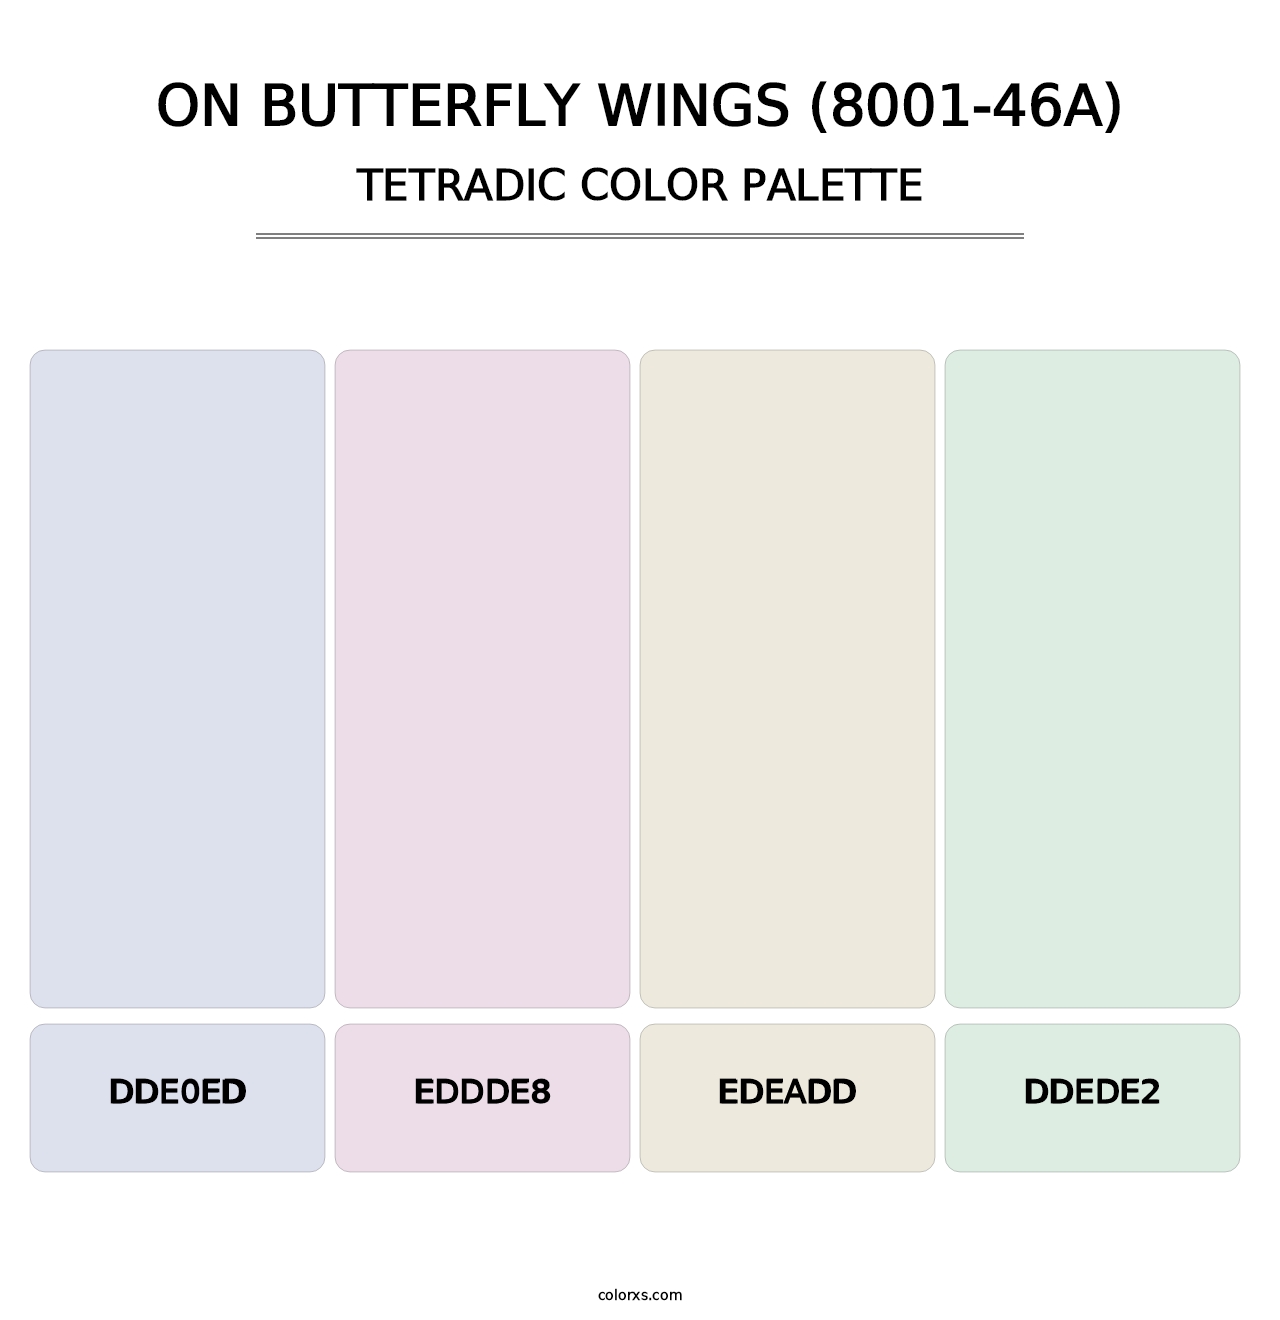 On Butterfly Wings (8001-46A) - Tetradic Color Palette